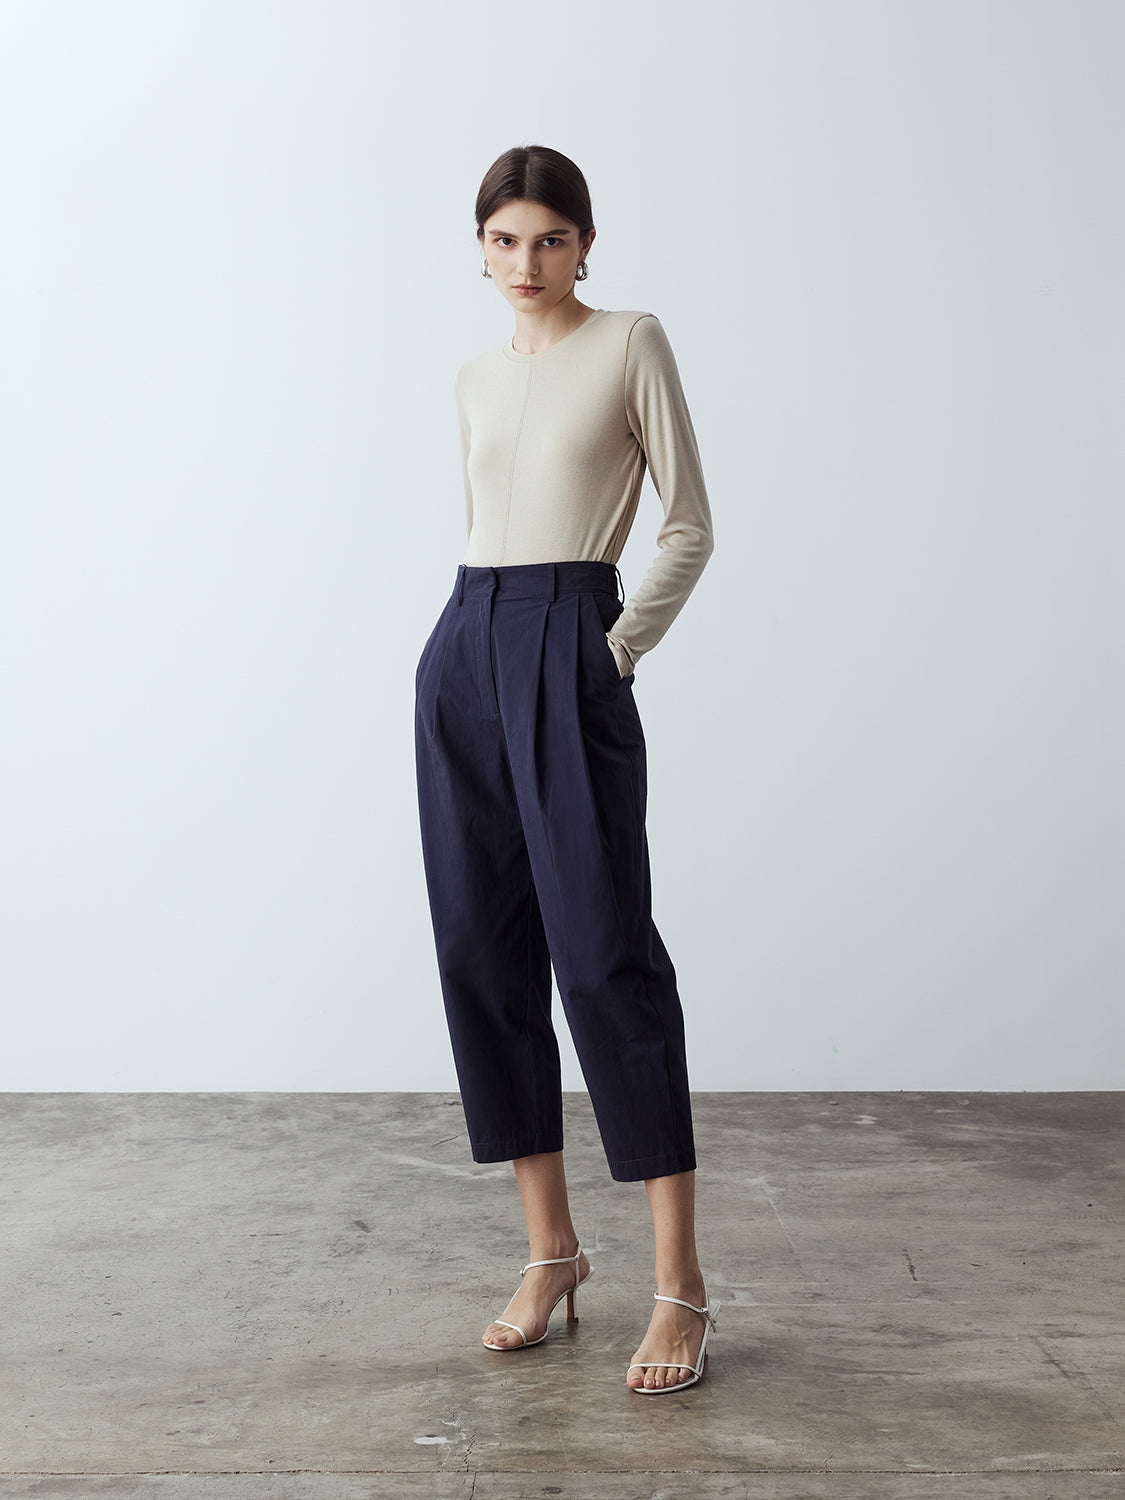 navy : Model is wearing the Cotton Tailored Trousers in Navy, which comes high-waisted with slash pockets at the sides, a concealed zip-fly closure and pleated details. Worn with the Fitted Long Sleeve T-Shirt in Sand and white strappy heels.